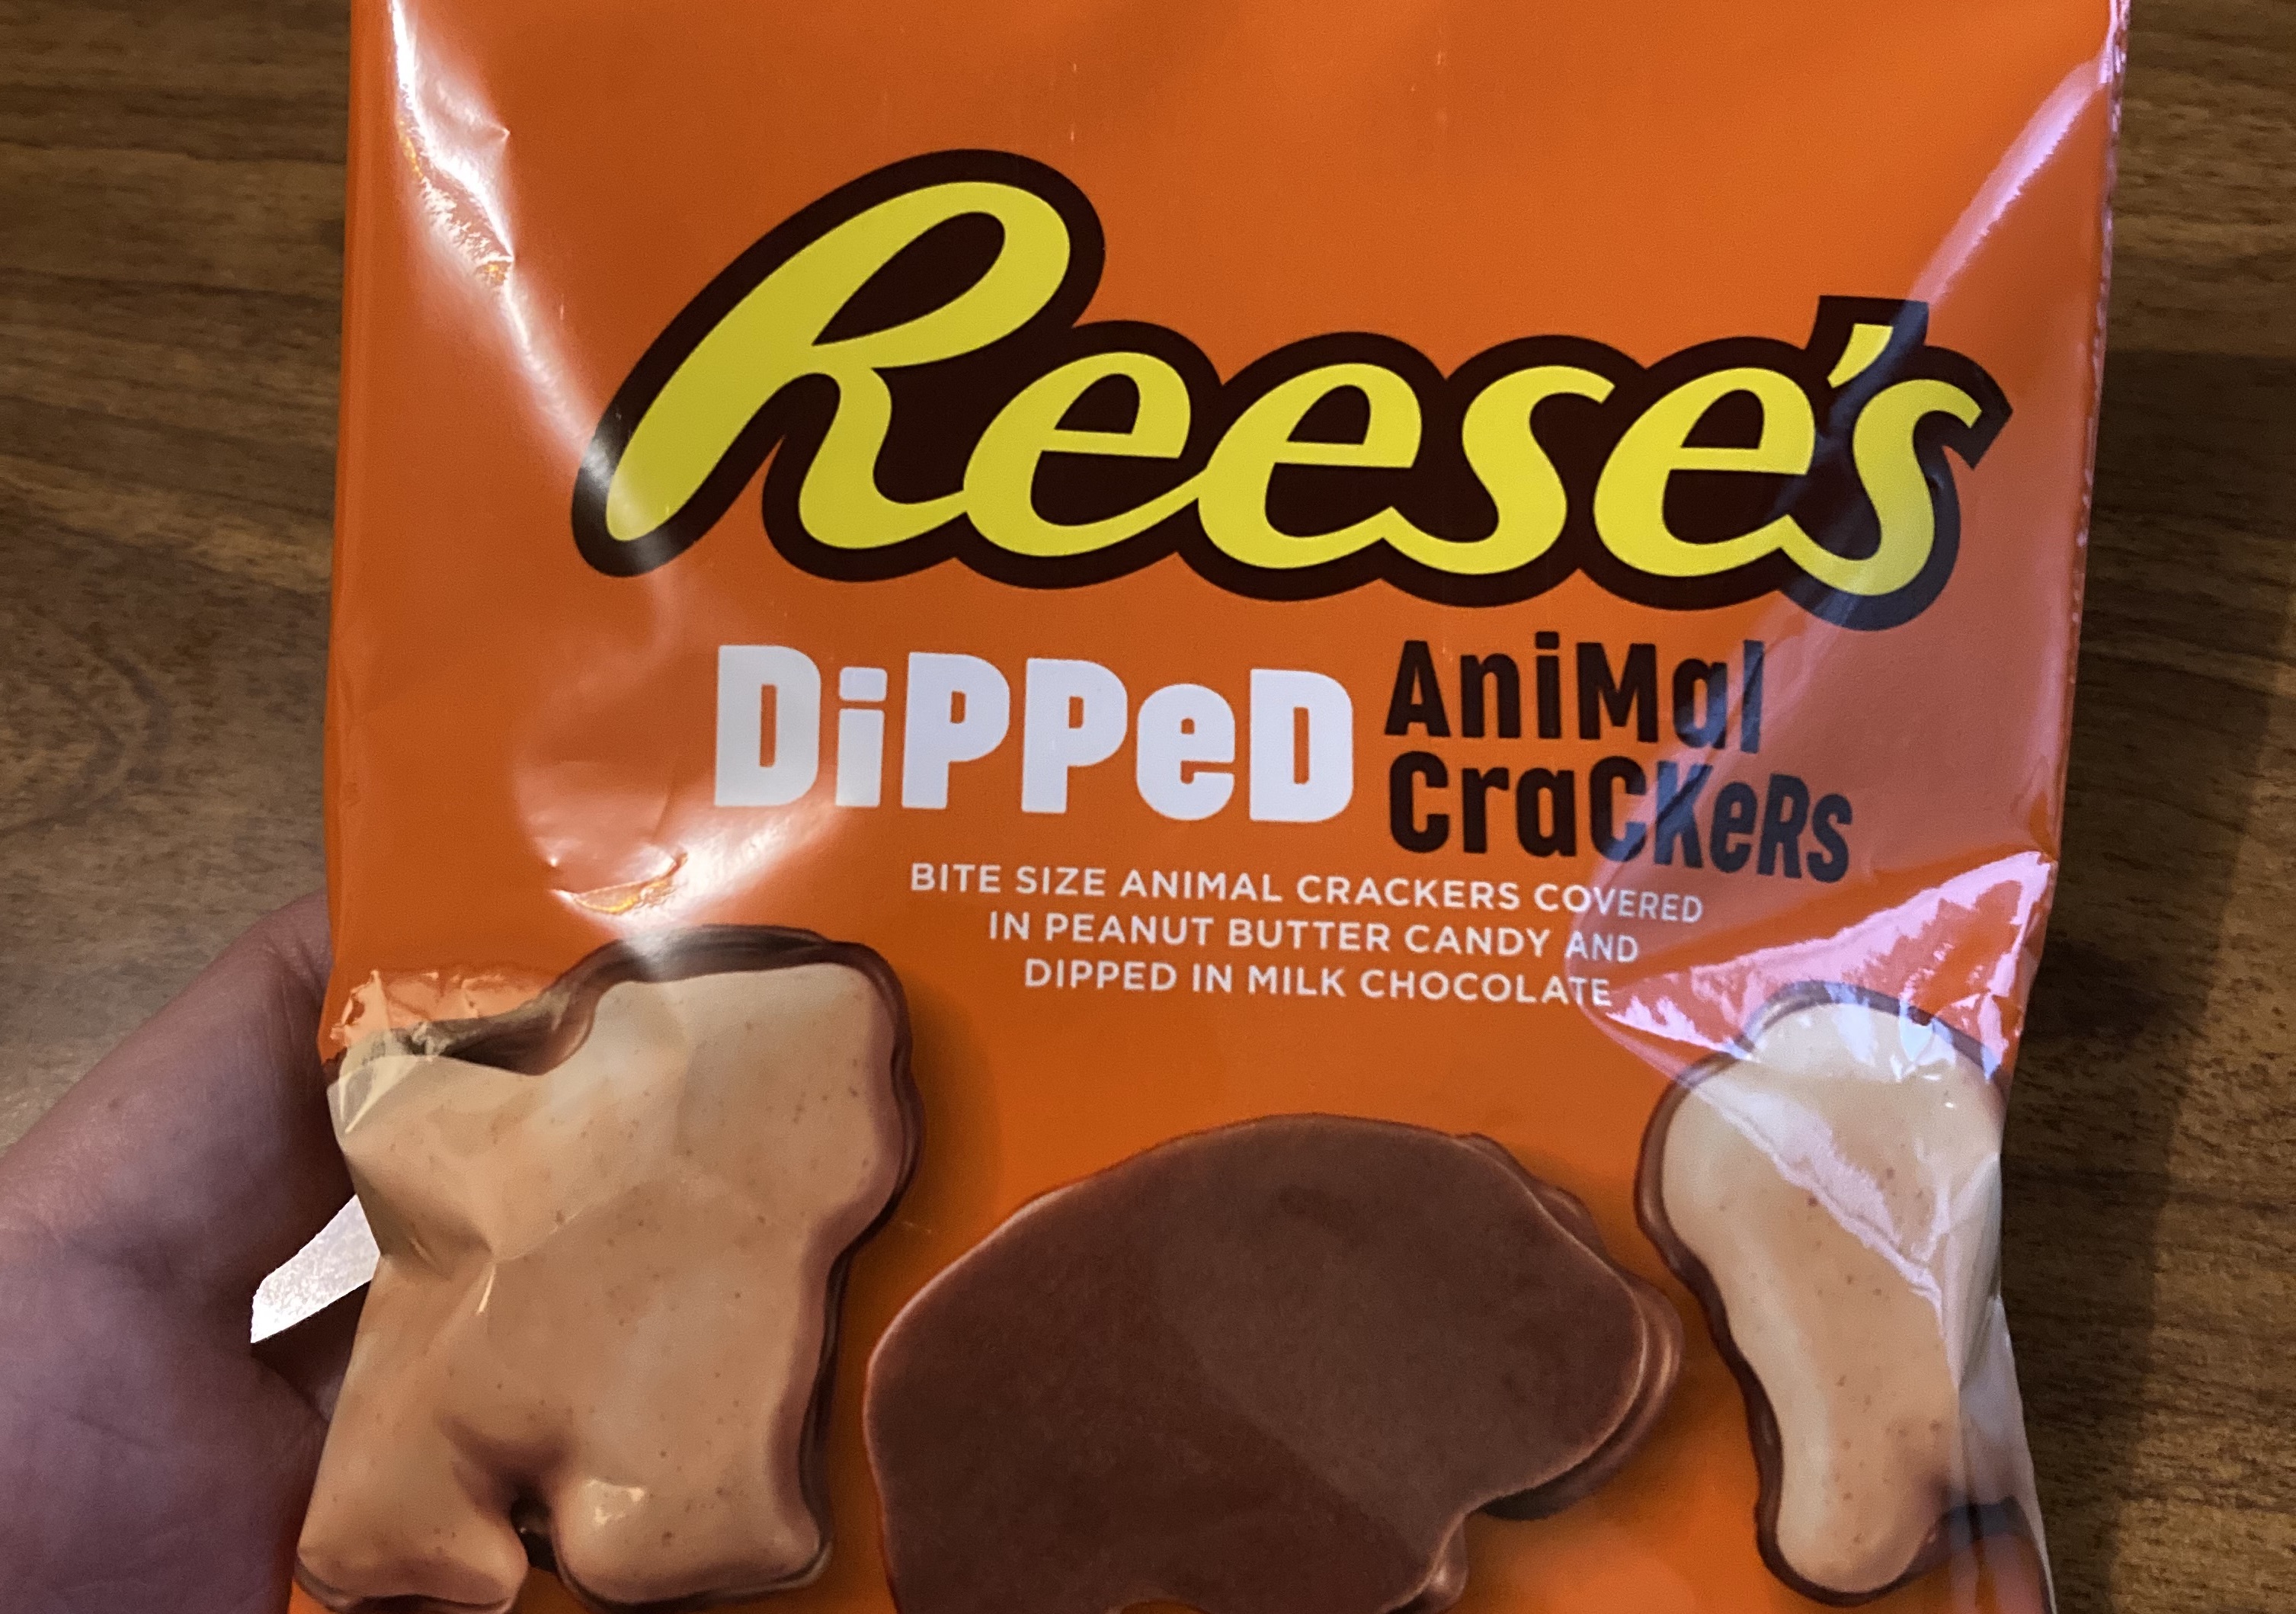 I tried the new Reese's Dipped Animal Crackers: How do they stack